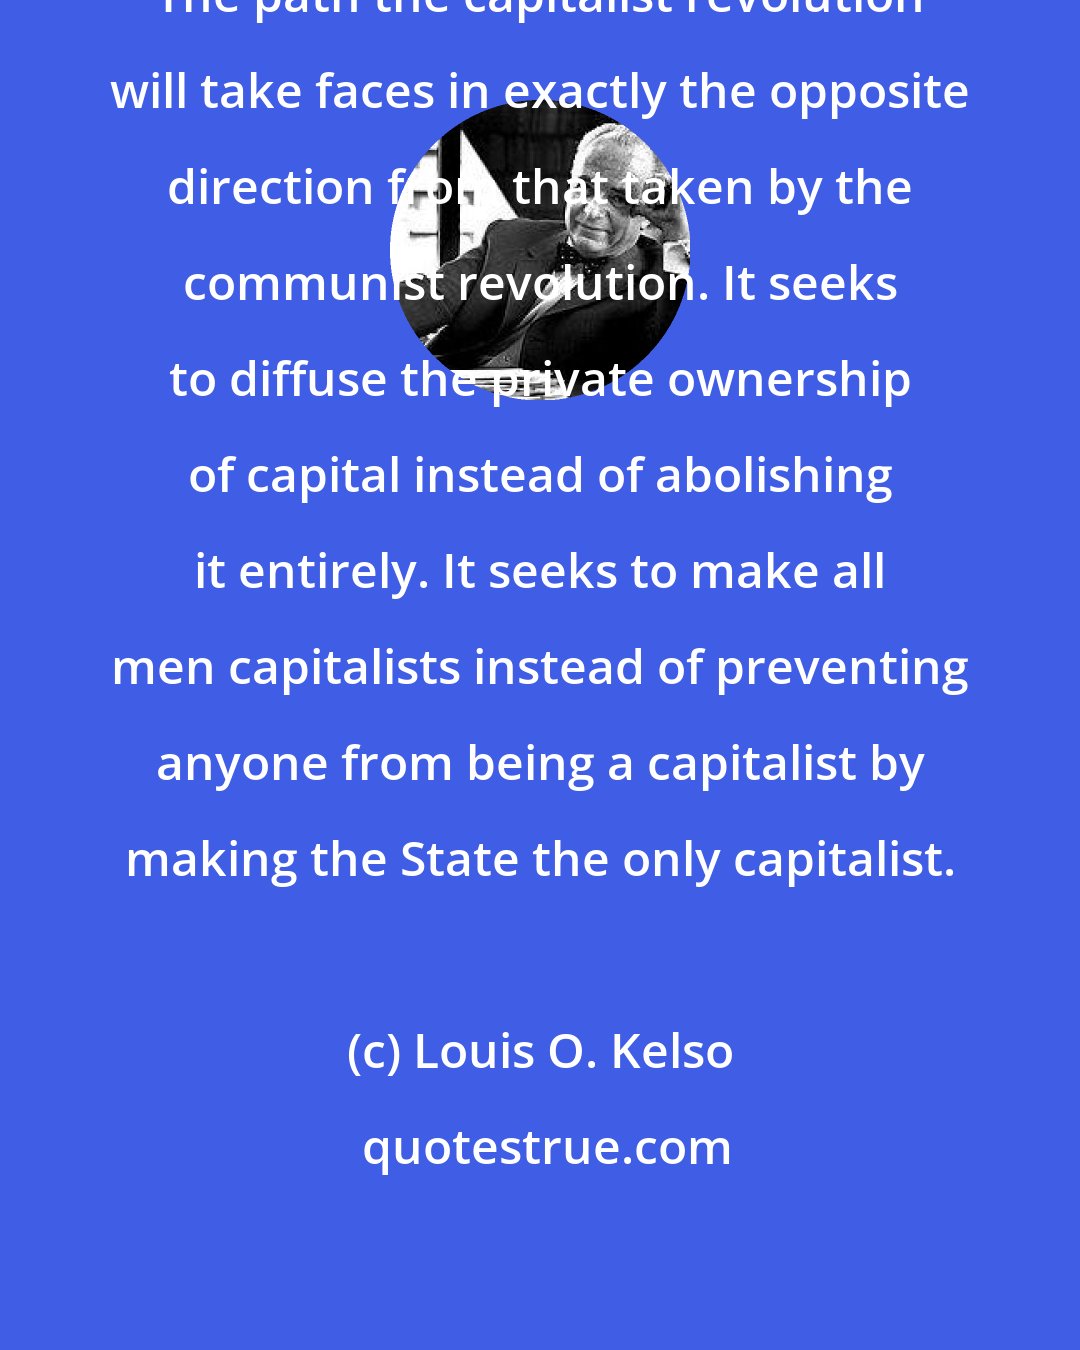 Louis O. Kelso: The path the capitalist revolution will take faces in exactly the opposite direction from that taken by the communist revolution. It seeks to diffuse the private ownership of capital instead of abolishing it entirely. It seeks to make all men capitalists instead of preventing anyone from being a capitalist by making the State the only capitalist.